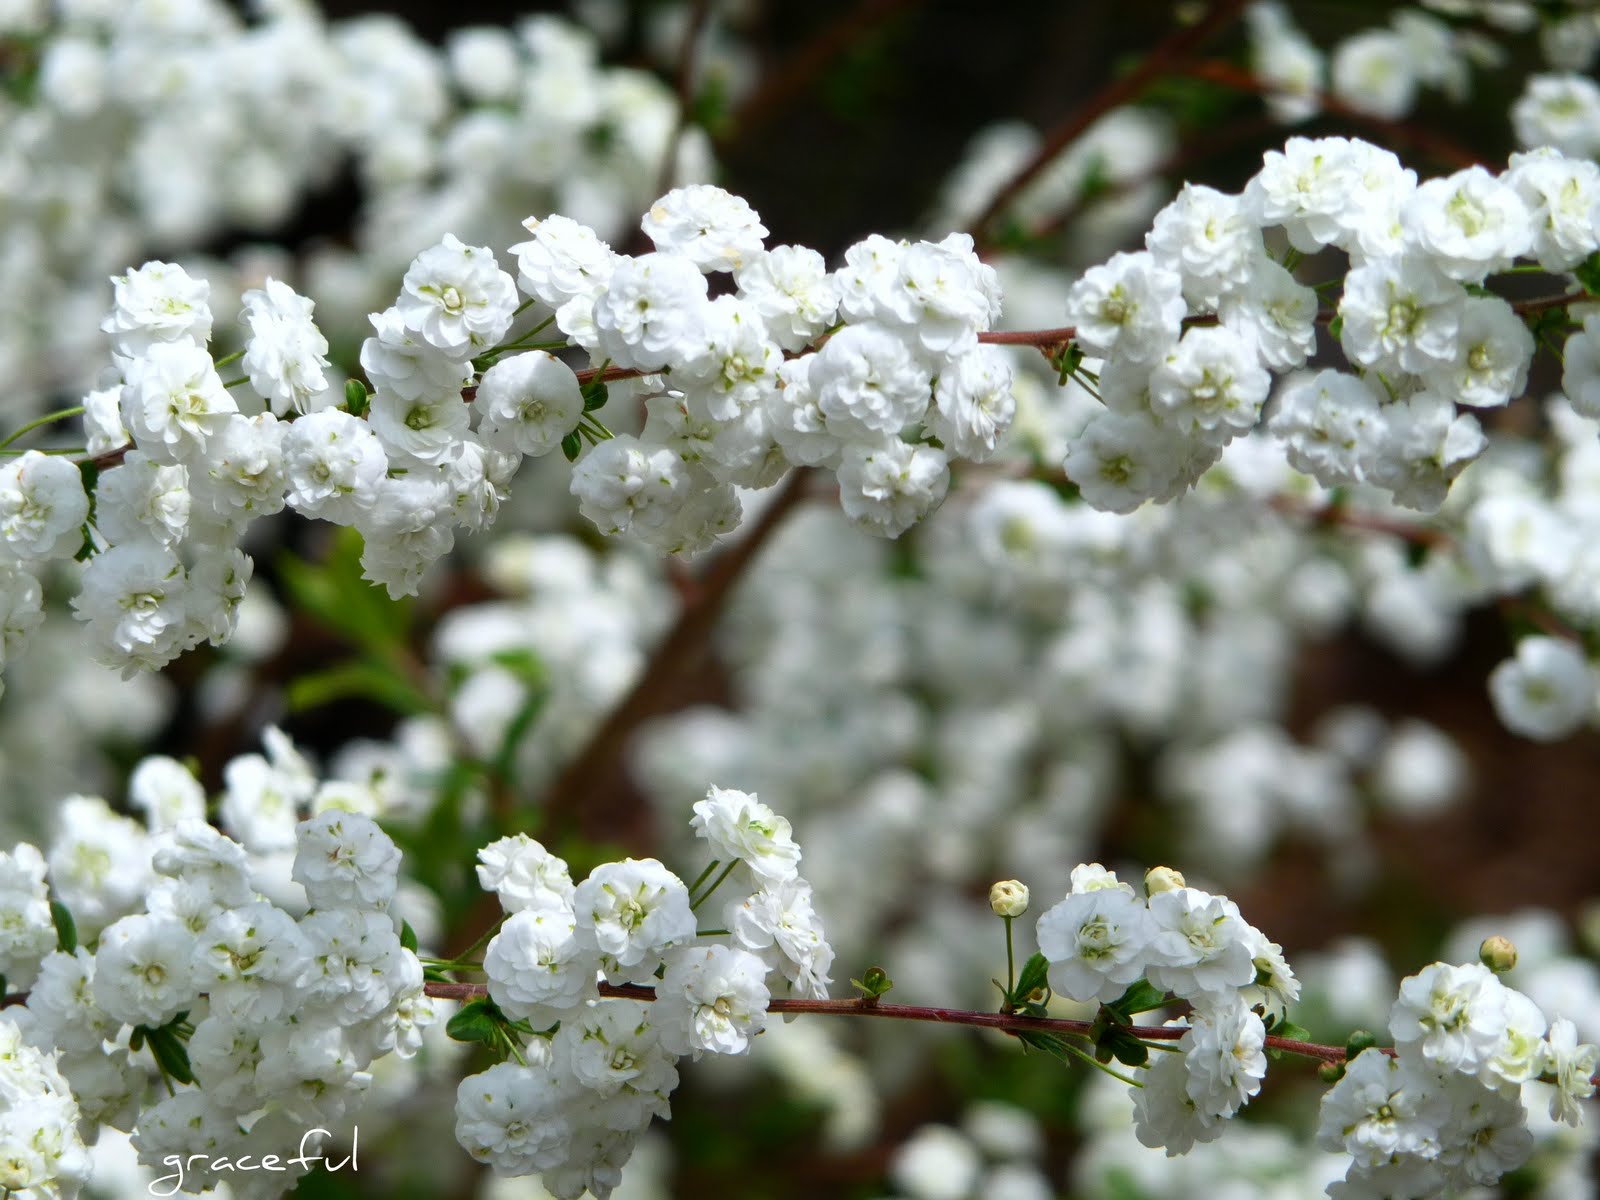 Plant Of The Day Plant Of The Day Is Spiraea Crenata Or